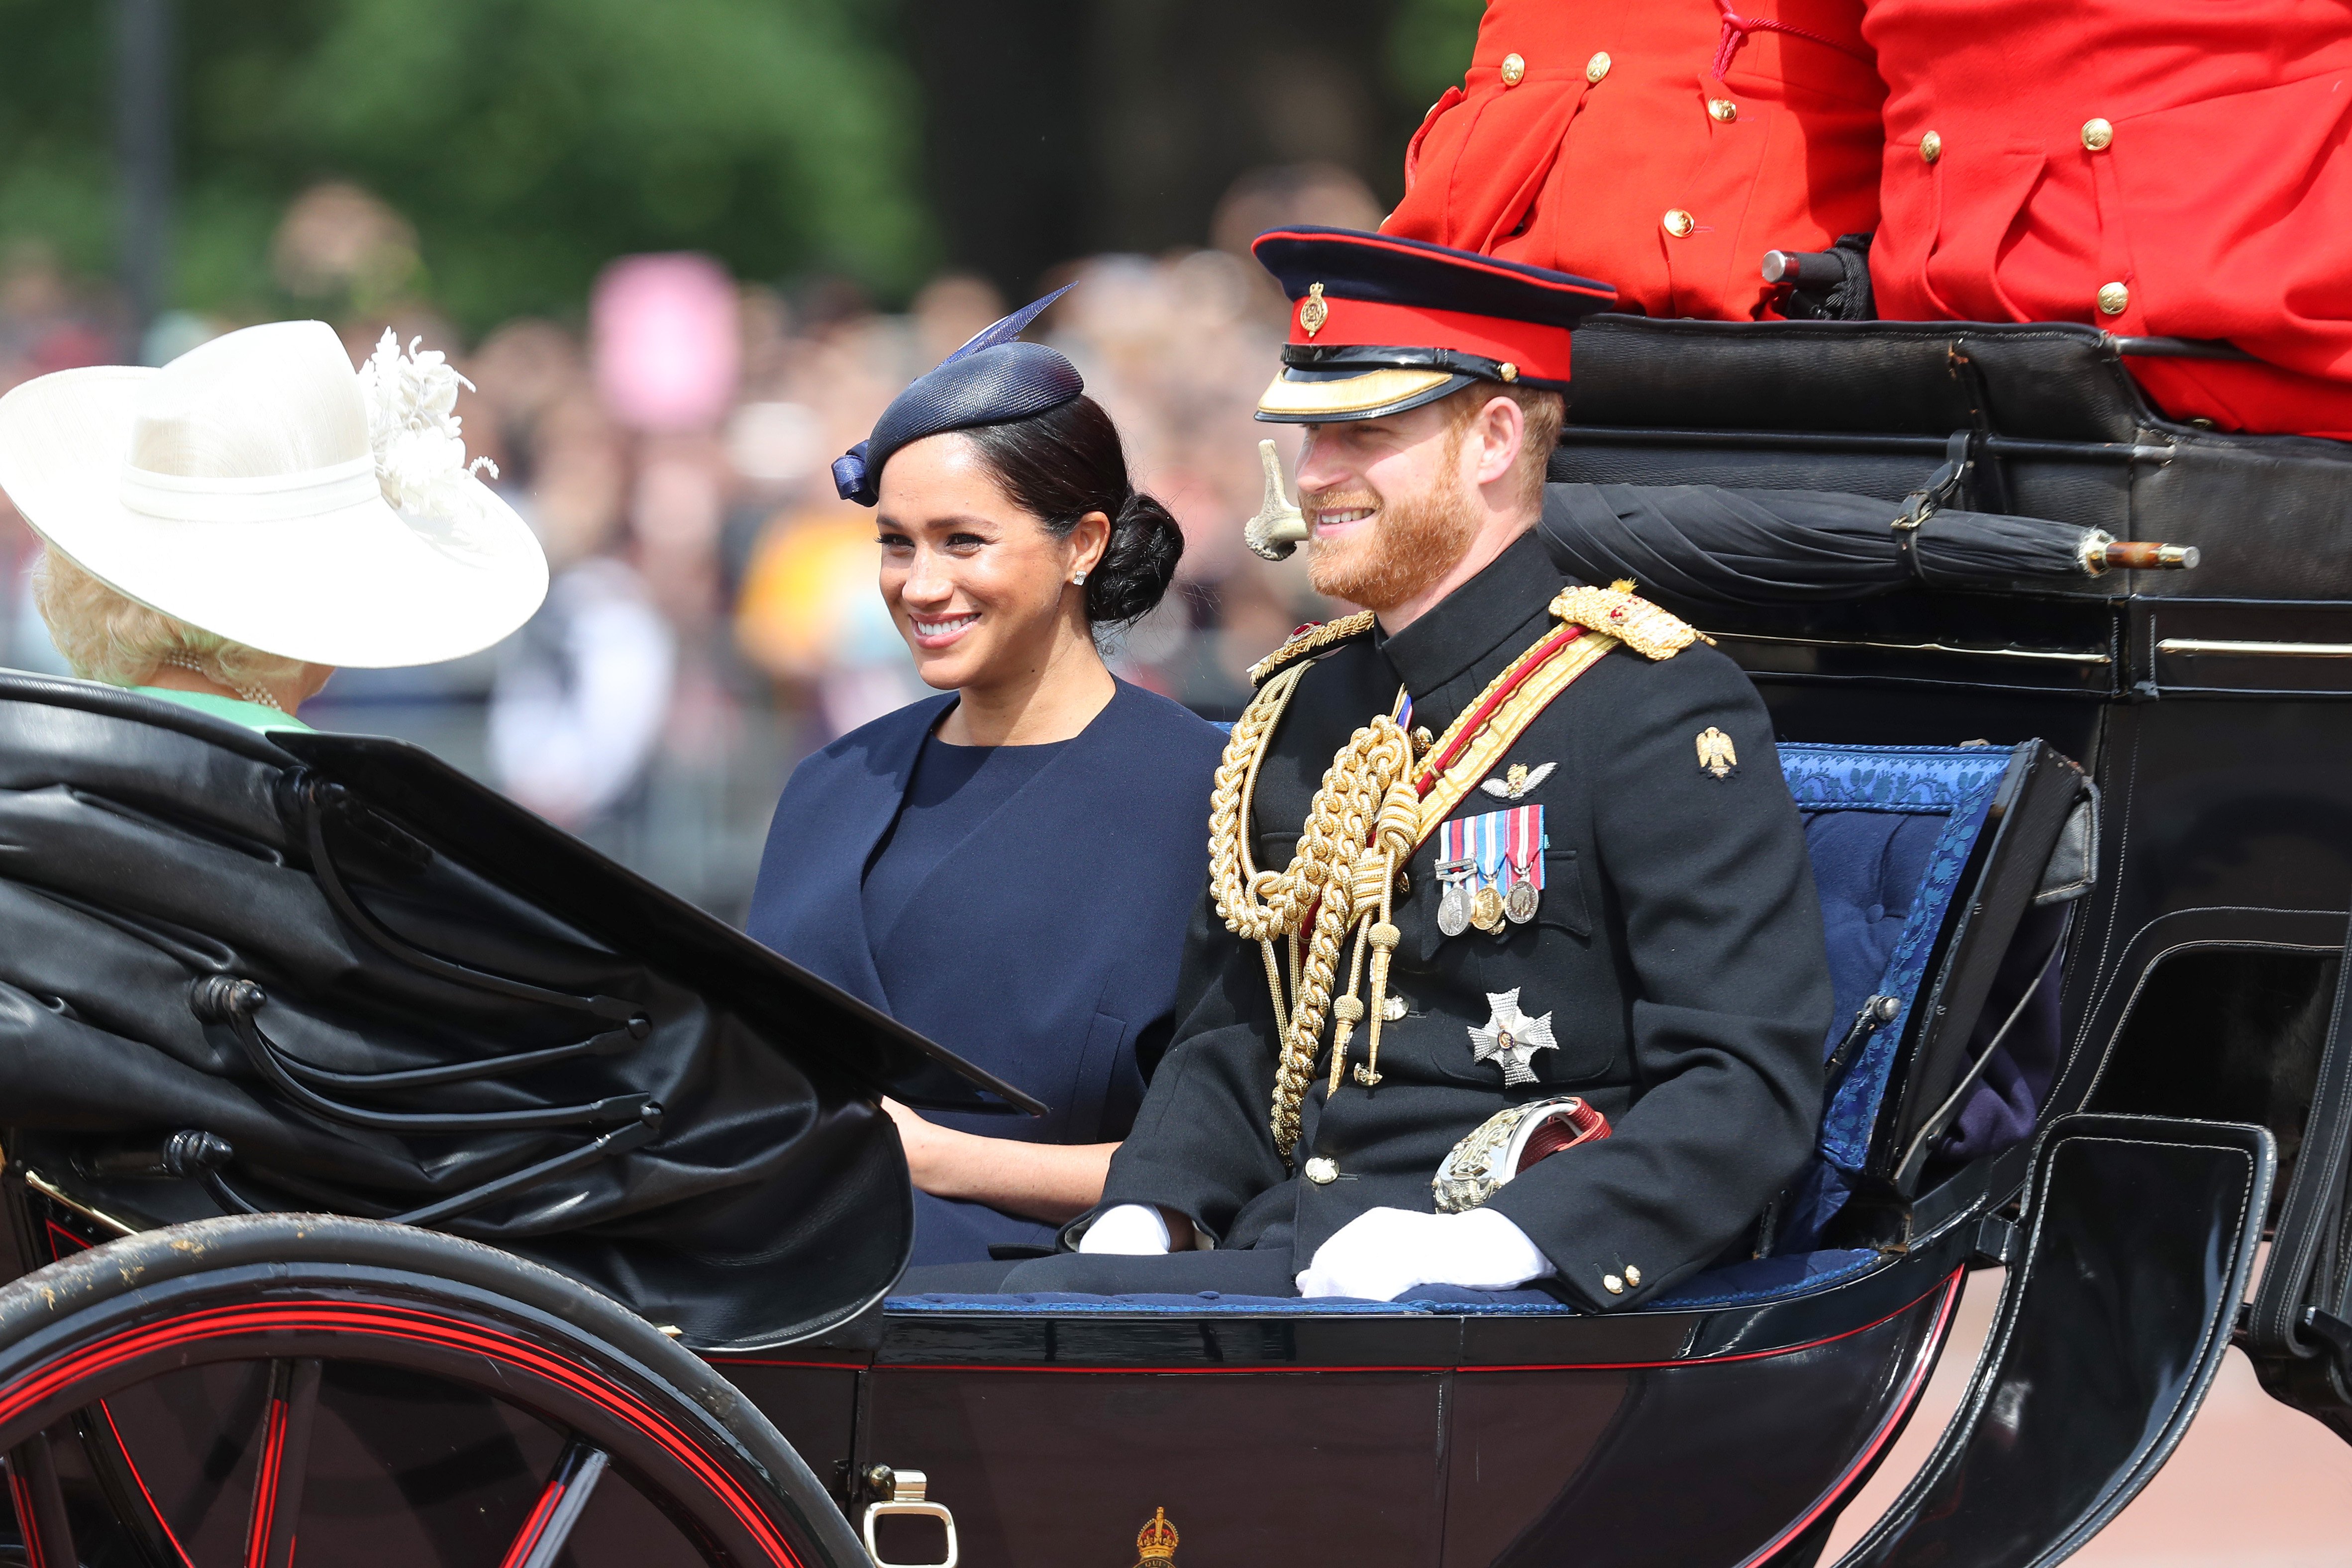 Meghan Markle and Prince Harry arrive at Trooping The Colour, the Queen's annual birthday parade, on June 08, 2019 in London, England | Photo: Getty Images